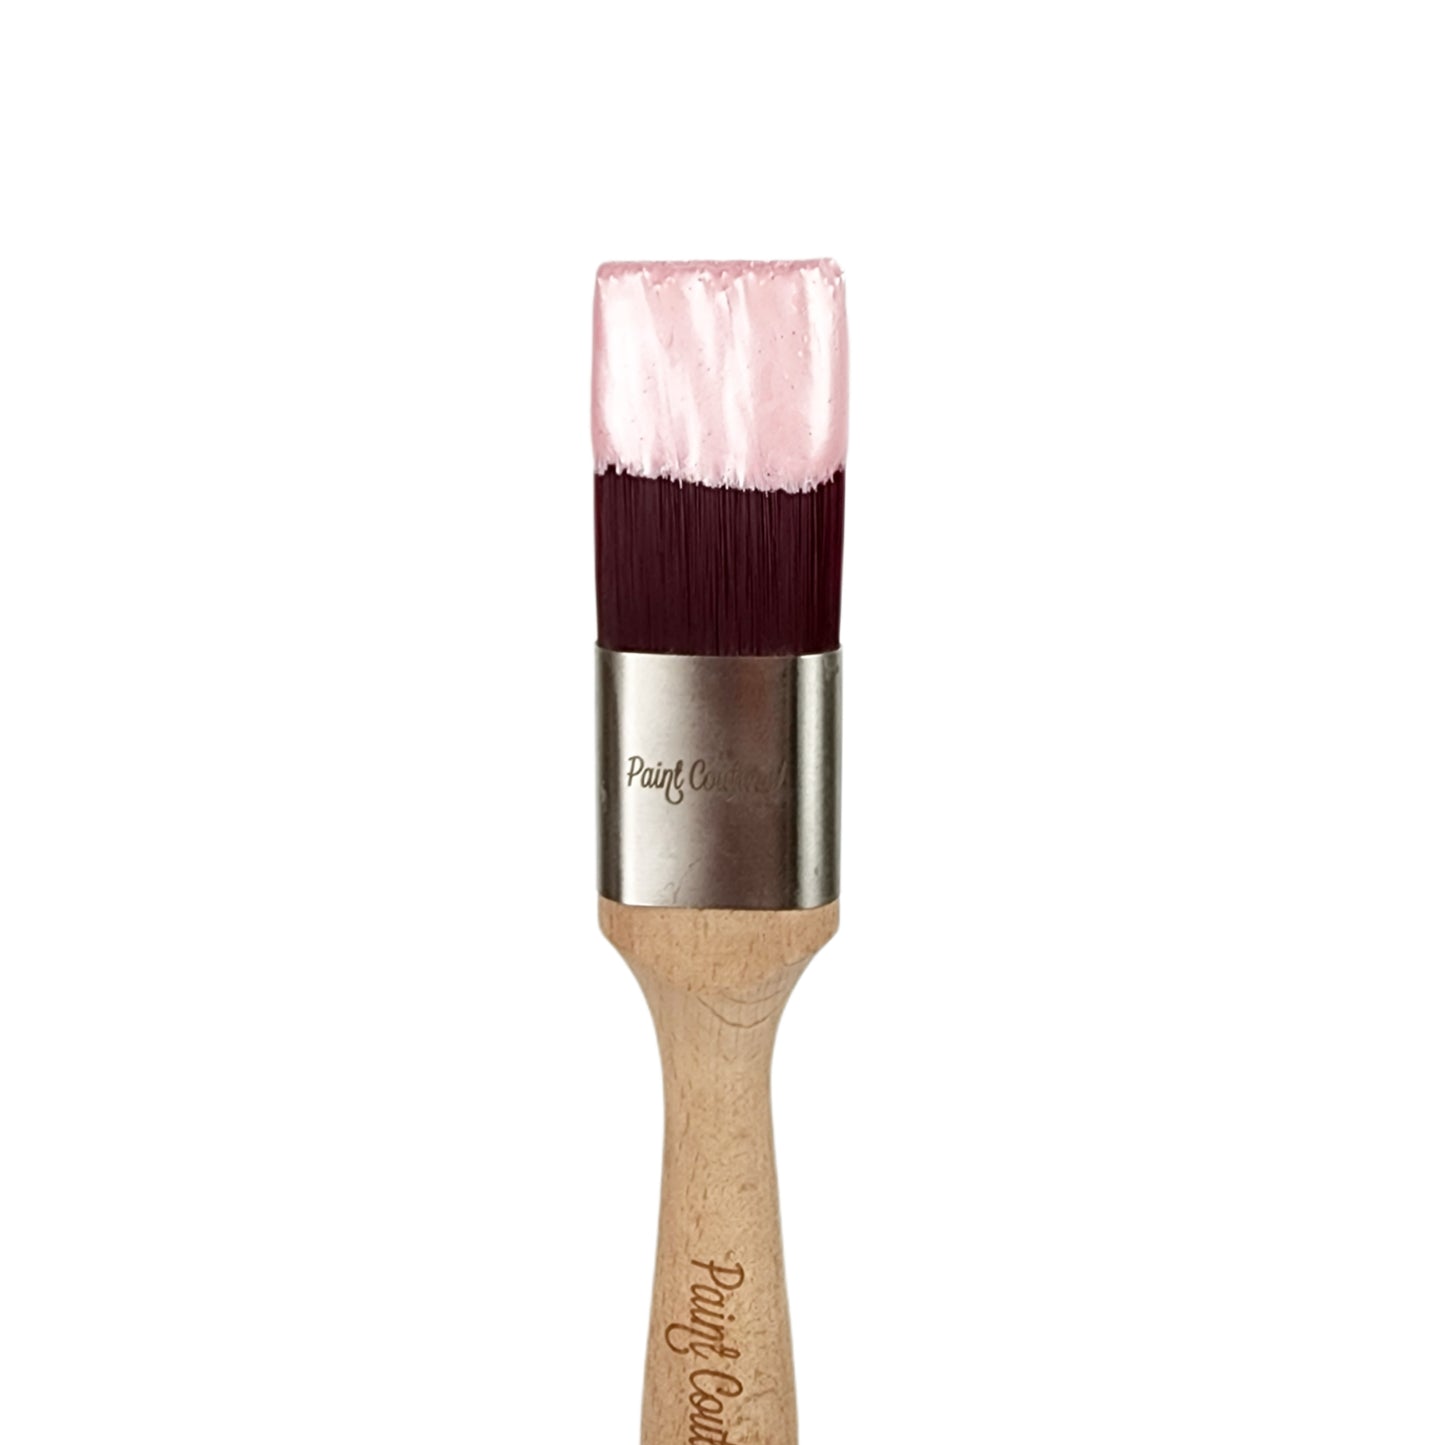 Paint Couture Lux Metallic Paint Cherry Blossom